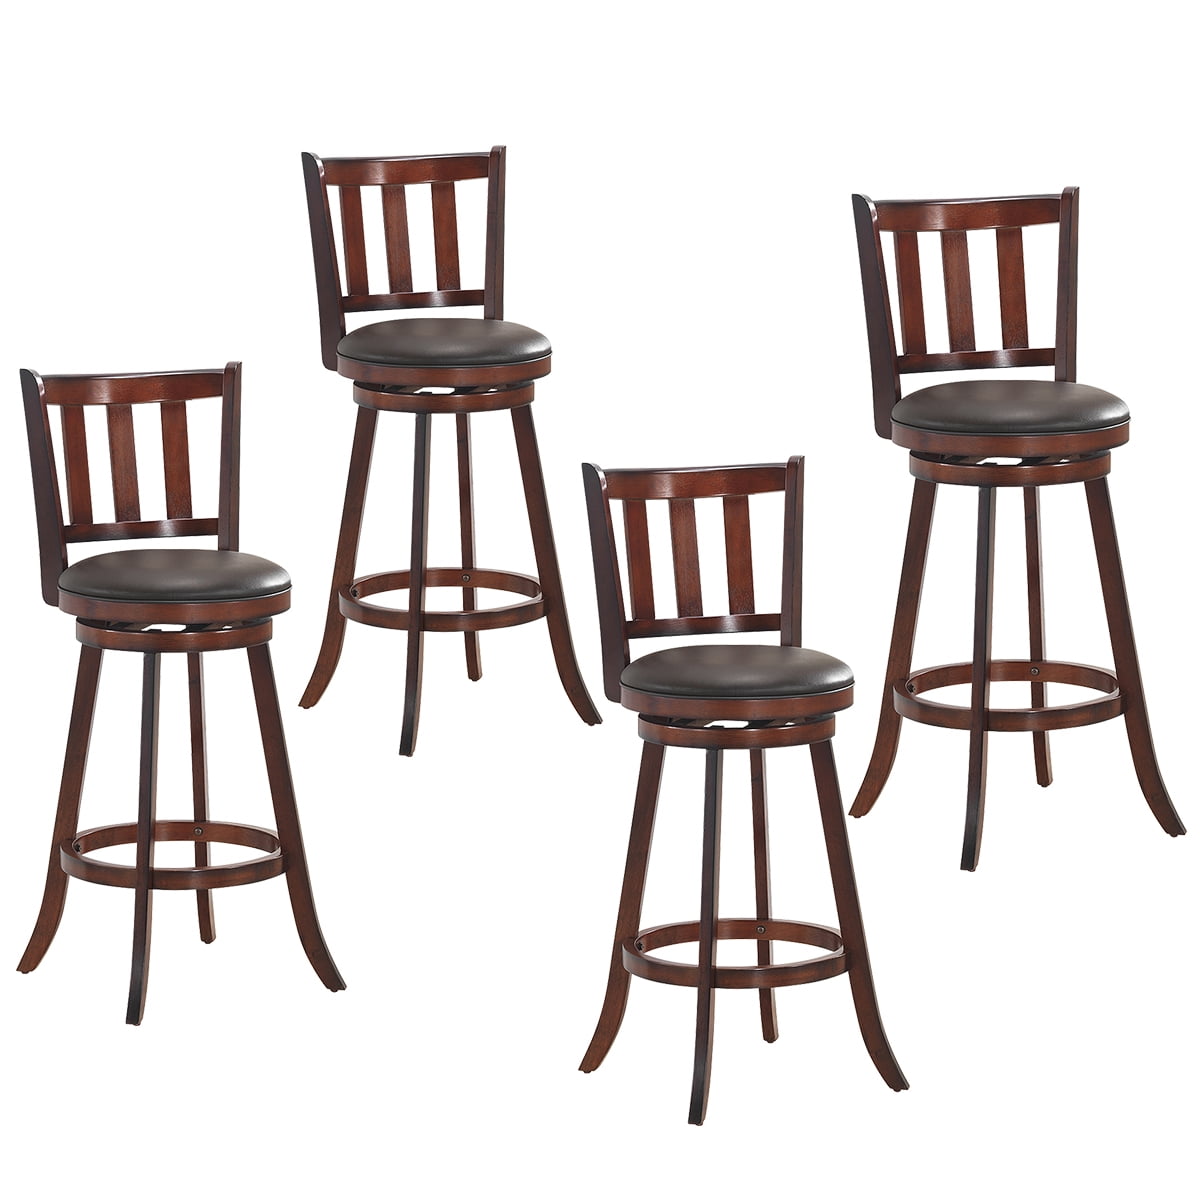 Height 24.5-Set of 2 Counter Height Dining Chair PVC Cushioned Seat COSTWAY Bar Stools Set of 2 Fabric Upholstered 360 Degree Swivel Perfect for Dining and Living Room 